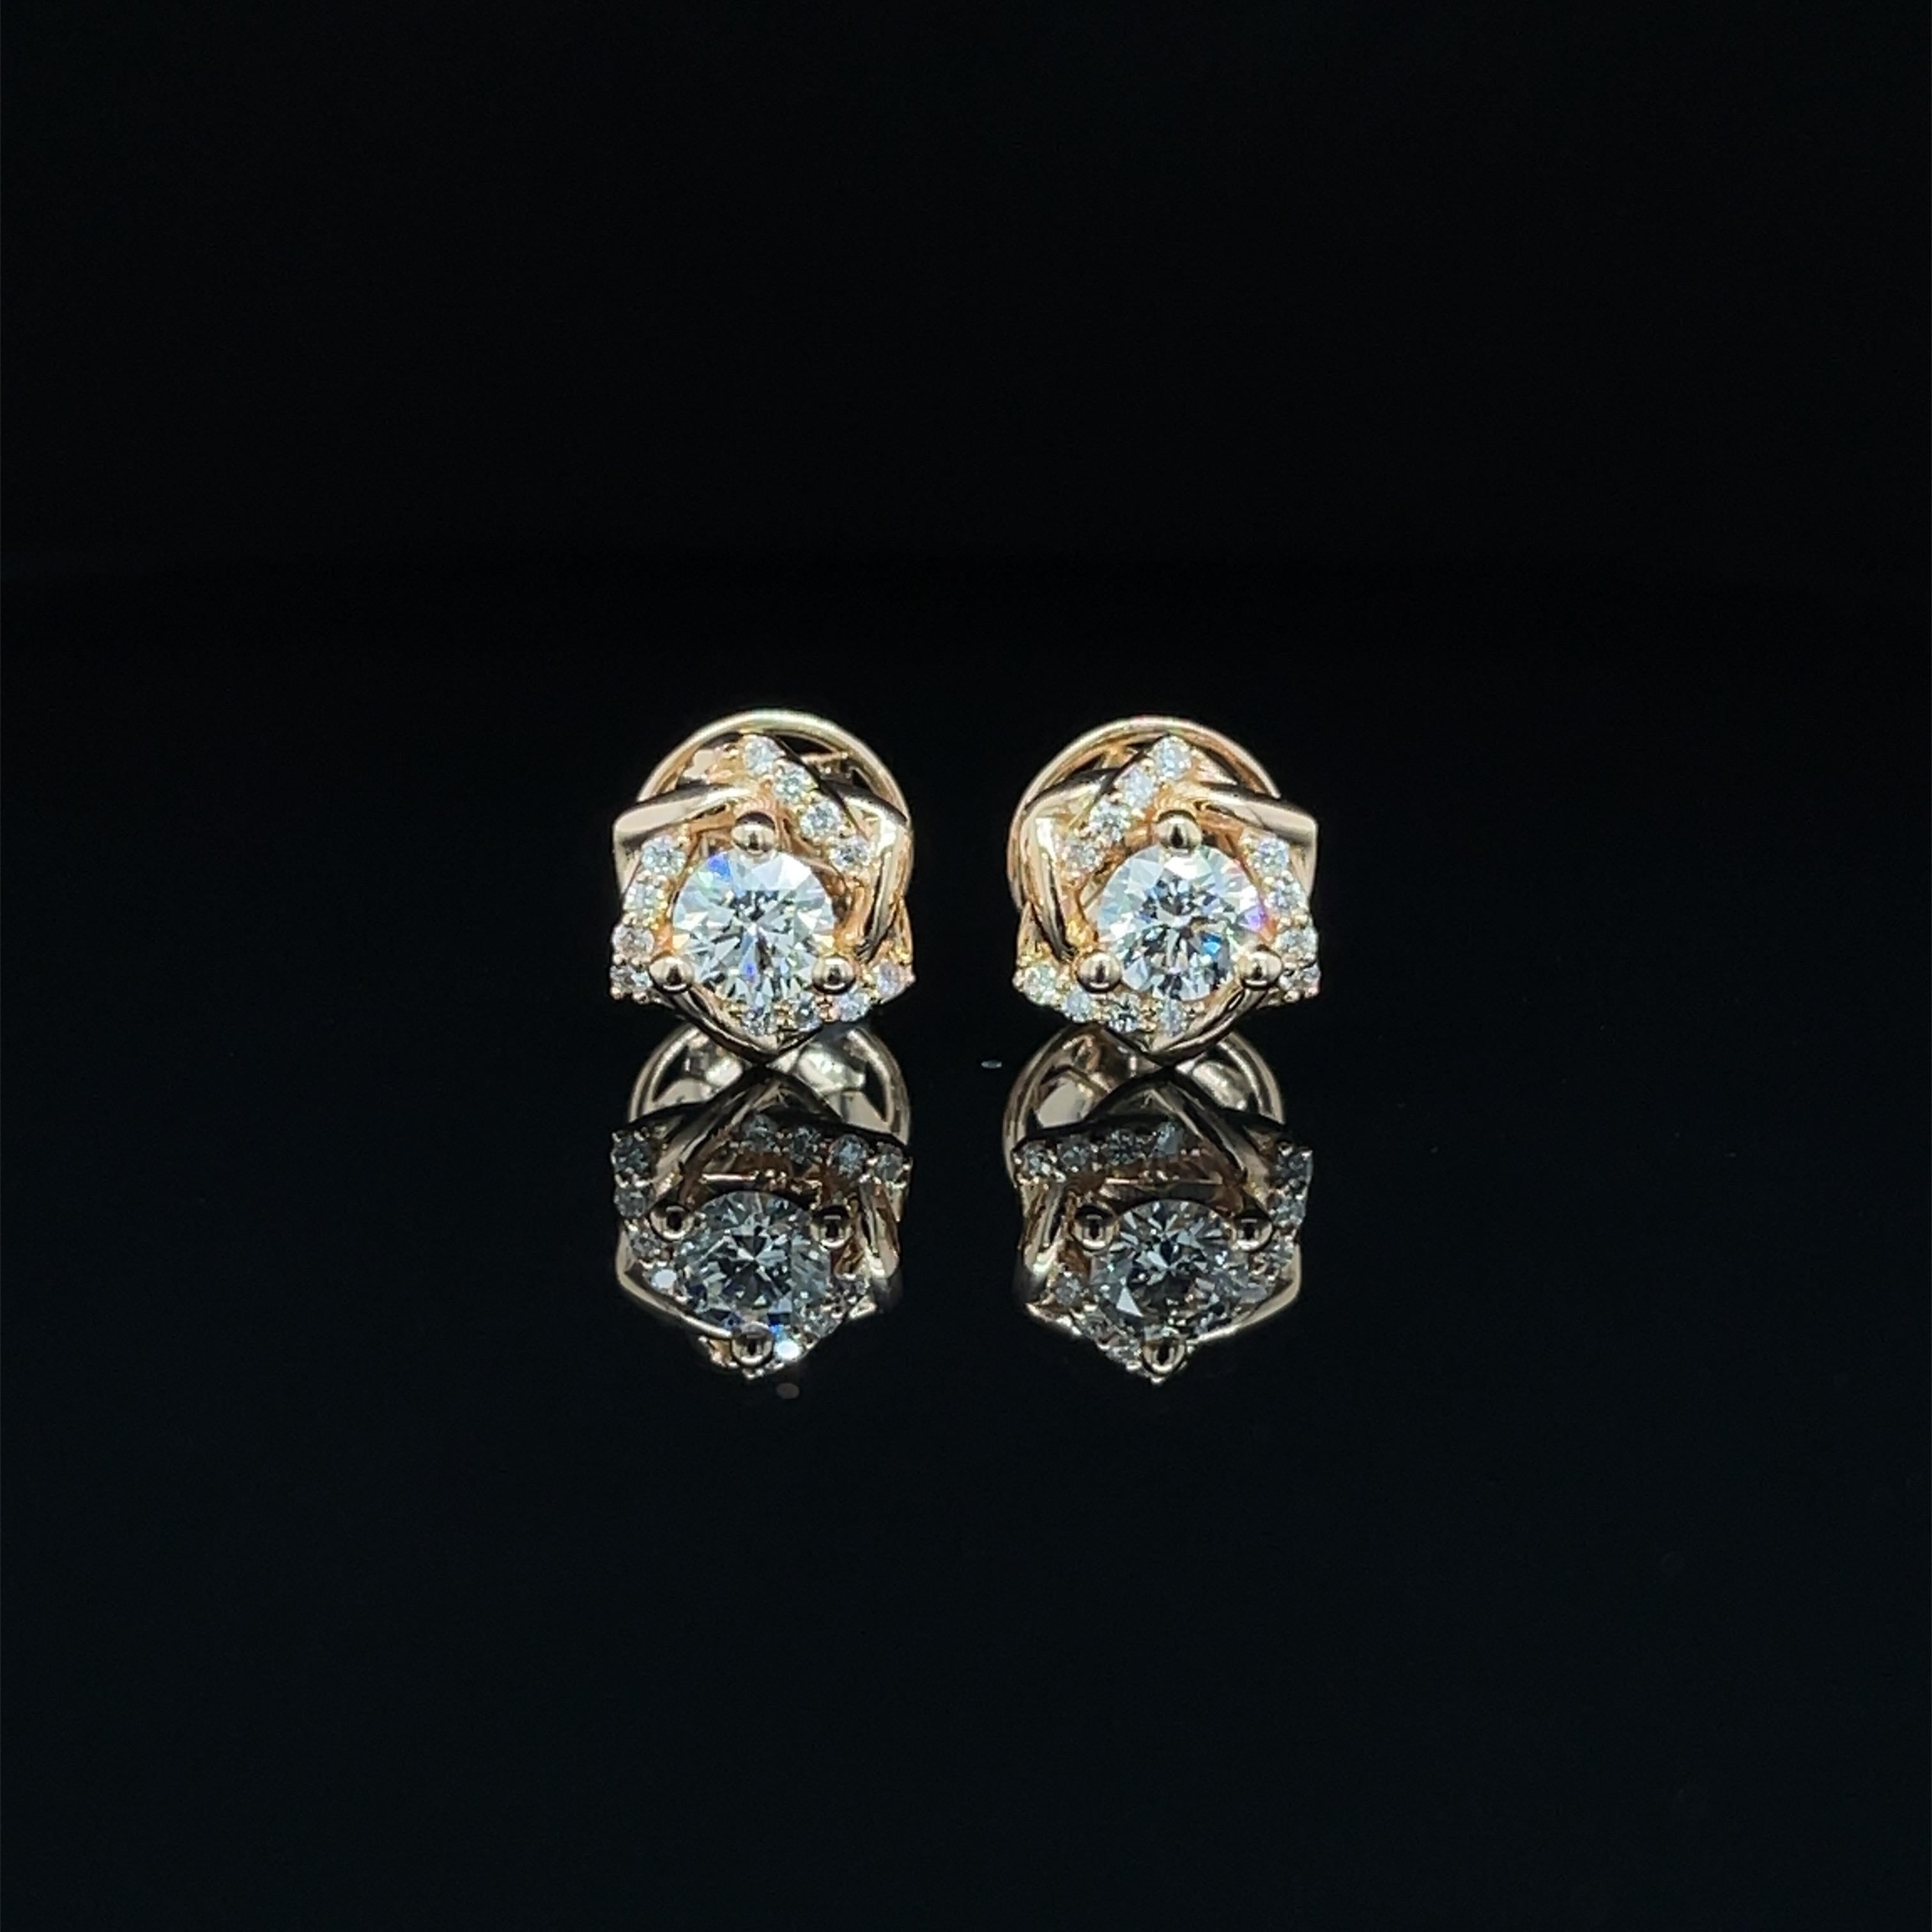 Pair of E VVS2 Round Diamonds 0.62 Carats in 18K Rose Gold  GIA Certified For Sale 3